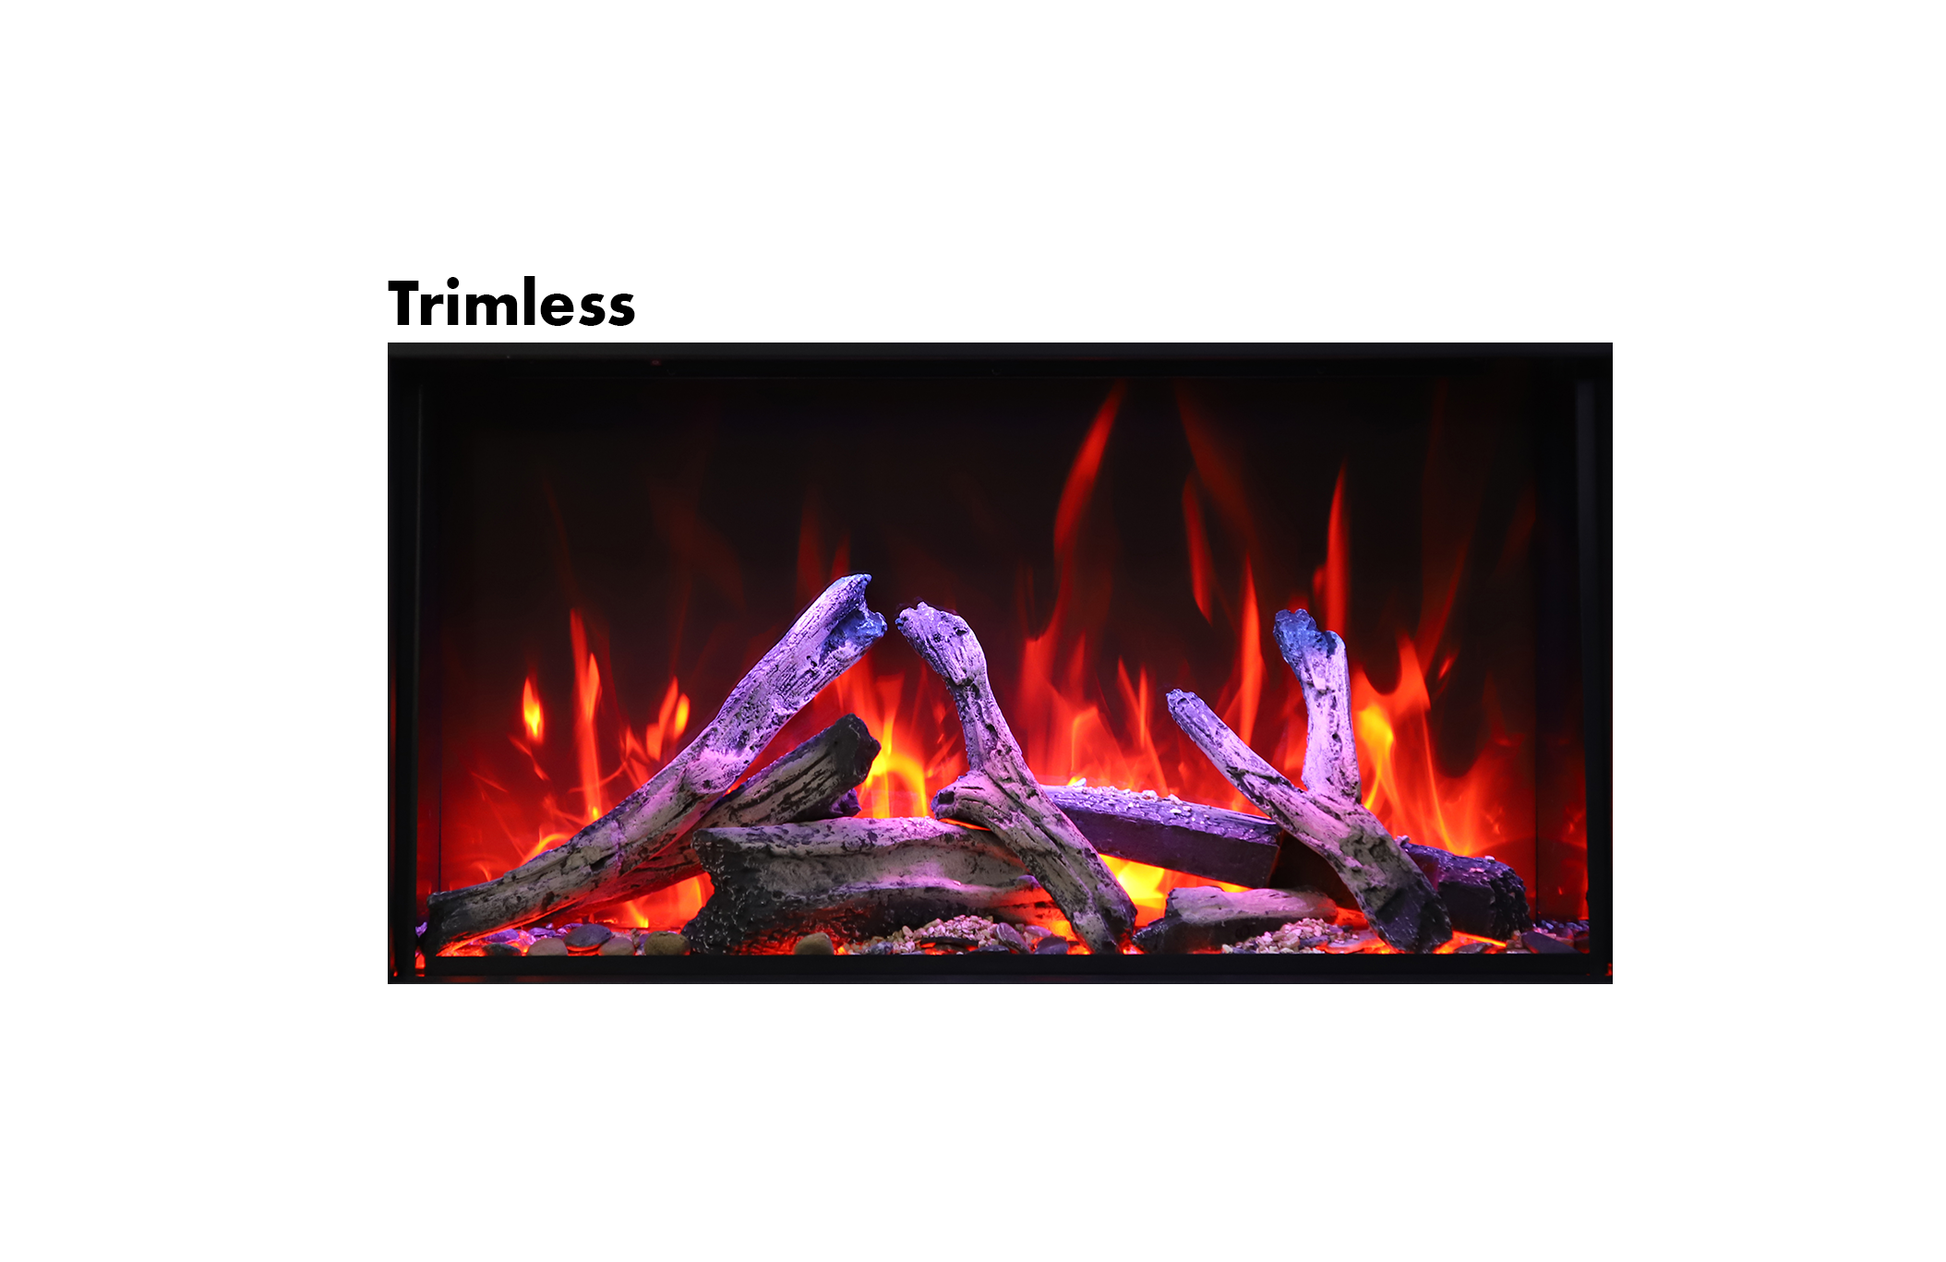 Panorama BI Deep XT Smart Electric Fireplace | Amantii | Built-in Steel Surround | Wifi Enabled | Buy Fireplaces Online